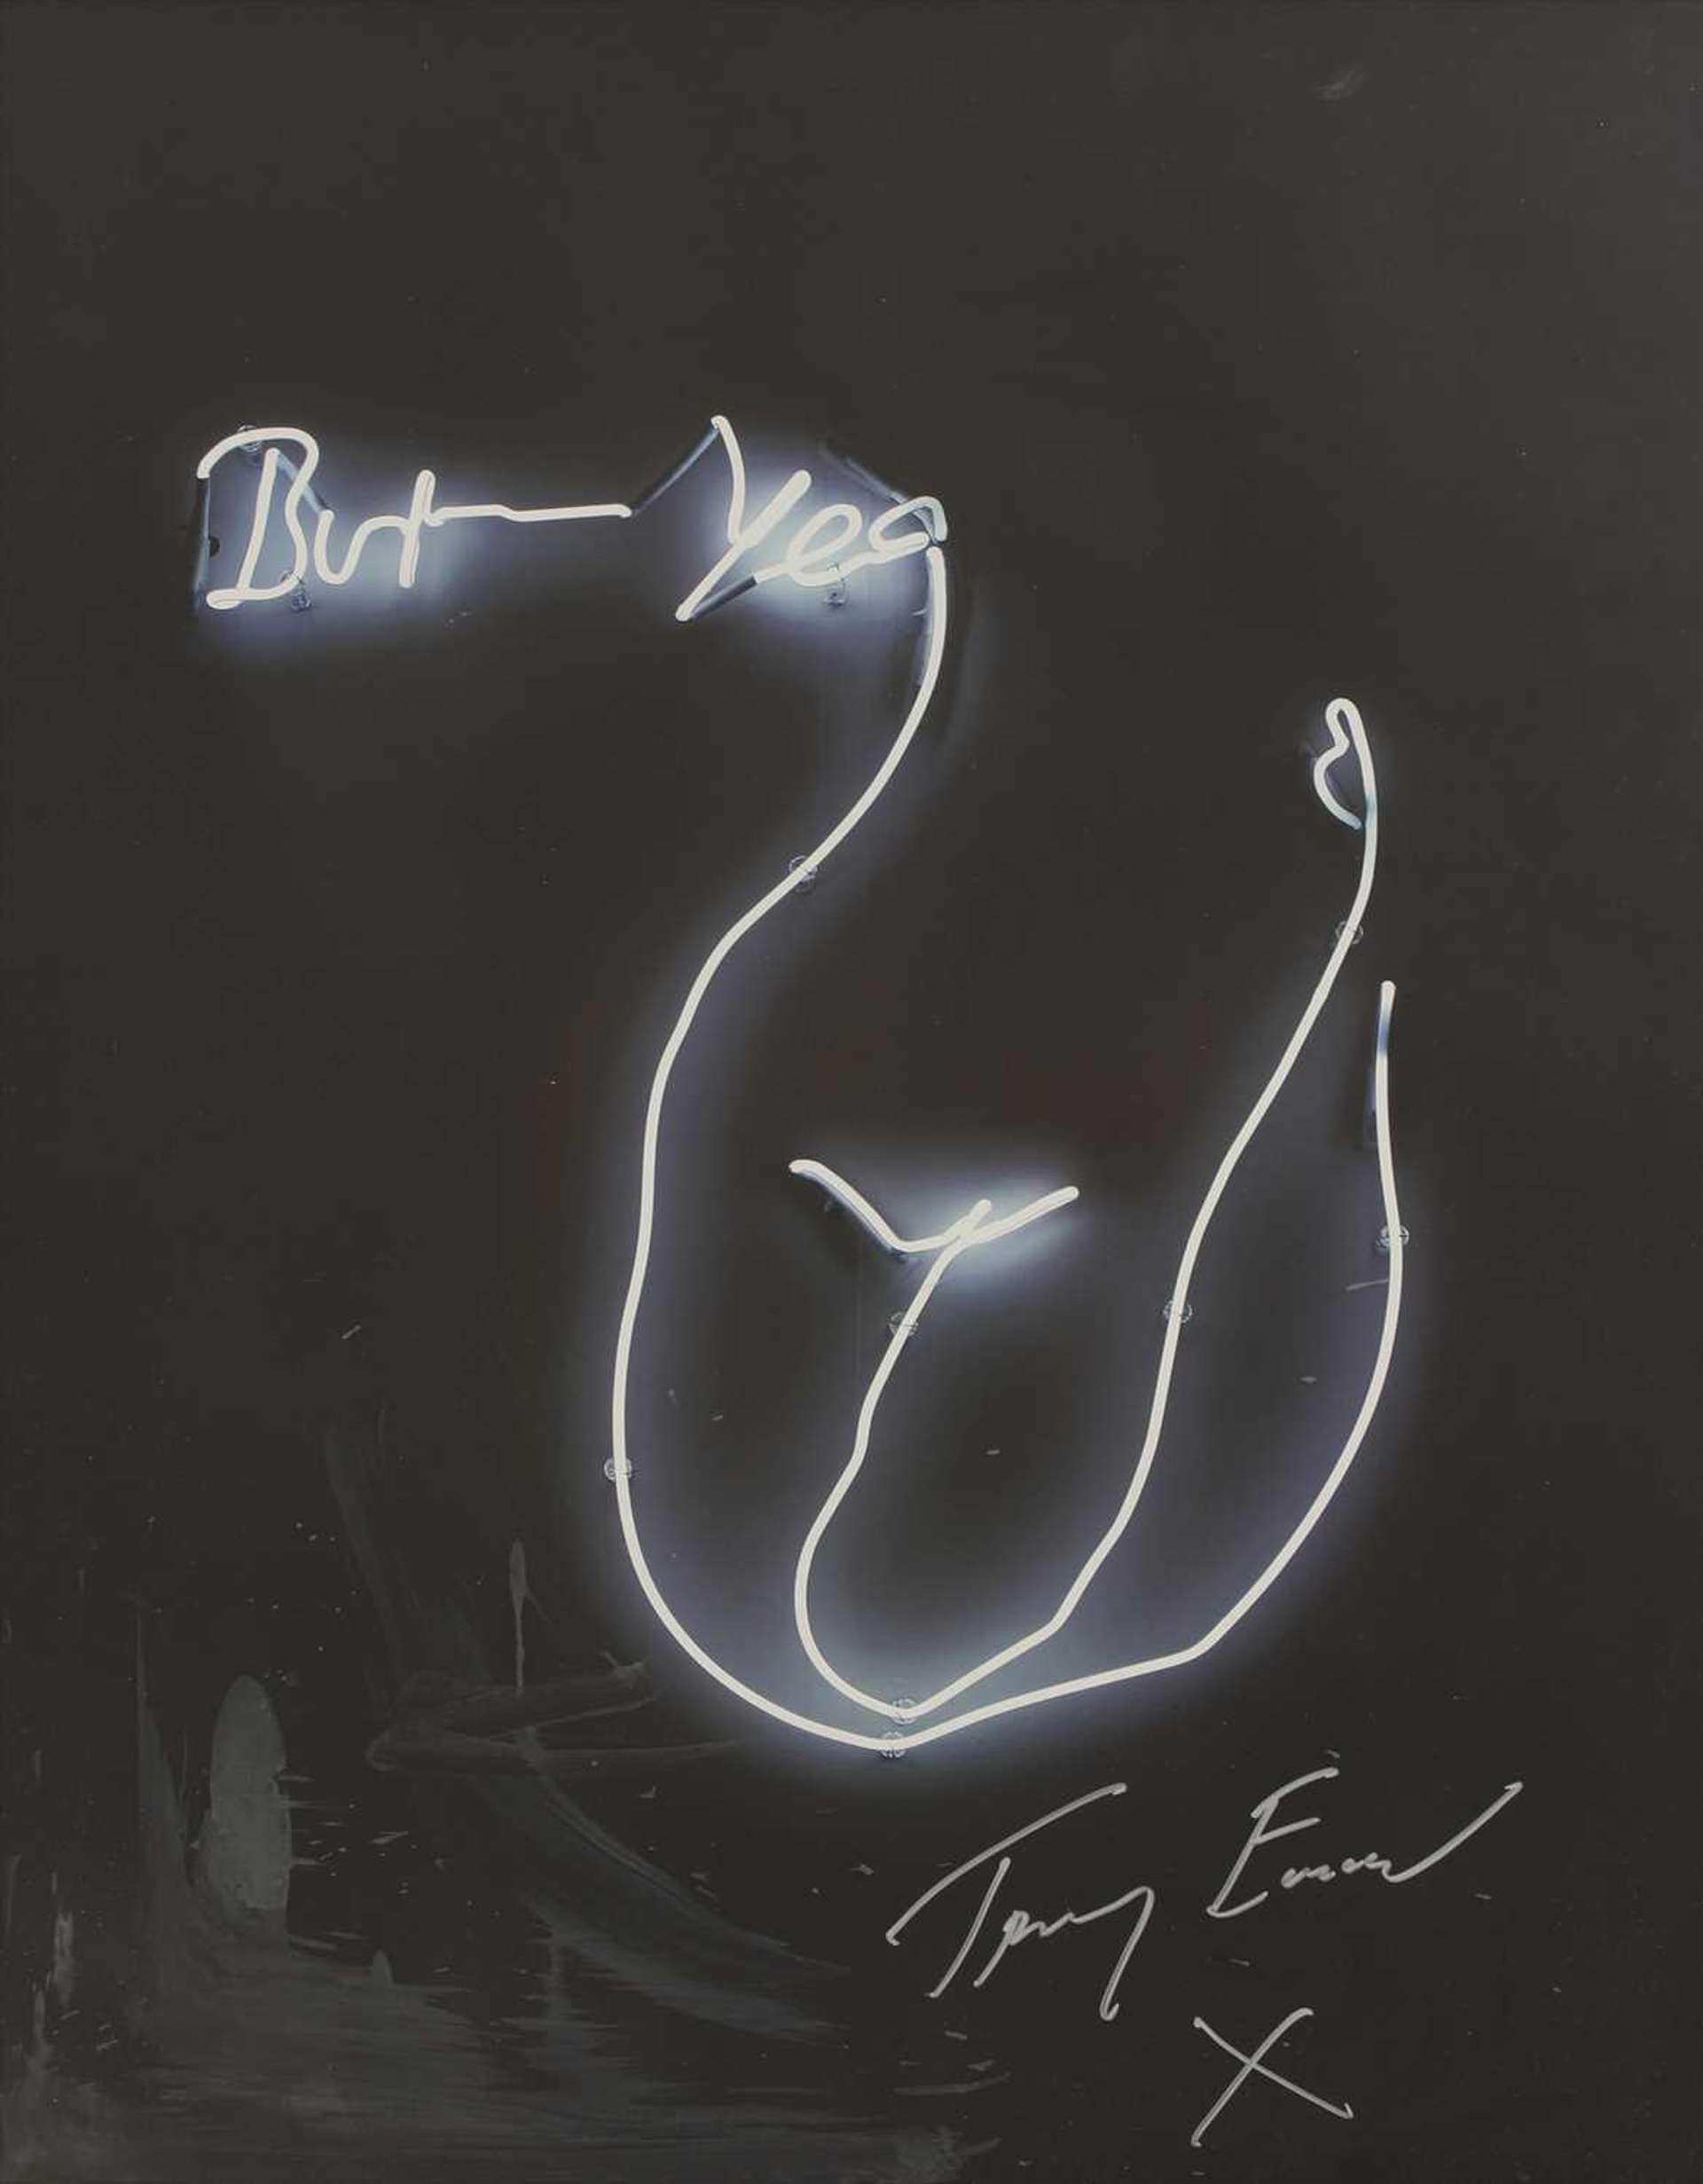 Tracey Emin’s But Yea. A print of a neon sign that reads “But yea” next to the lower half of an outline of a silhouette of the lower half of a woman’s body. 